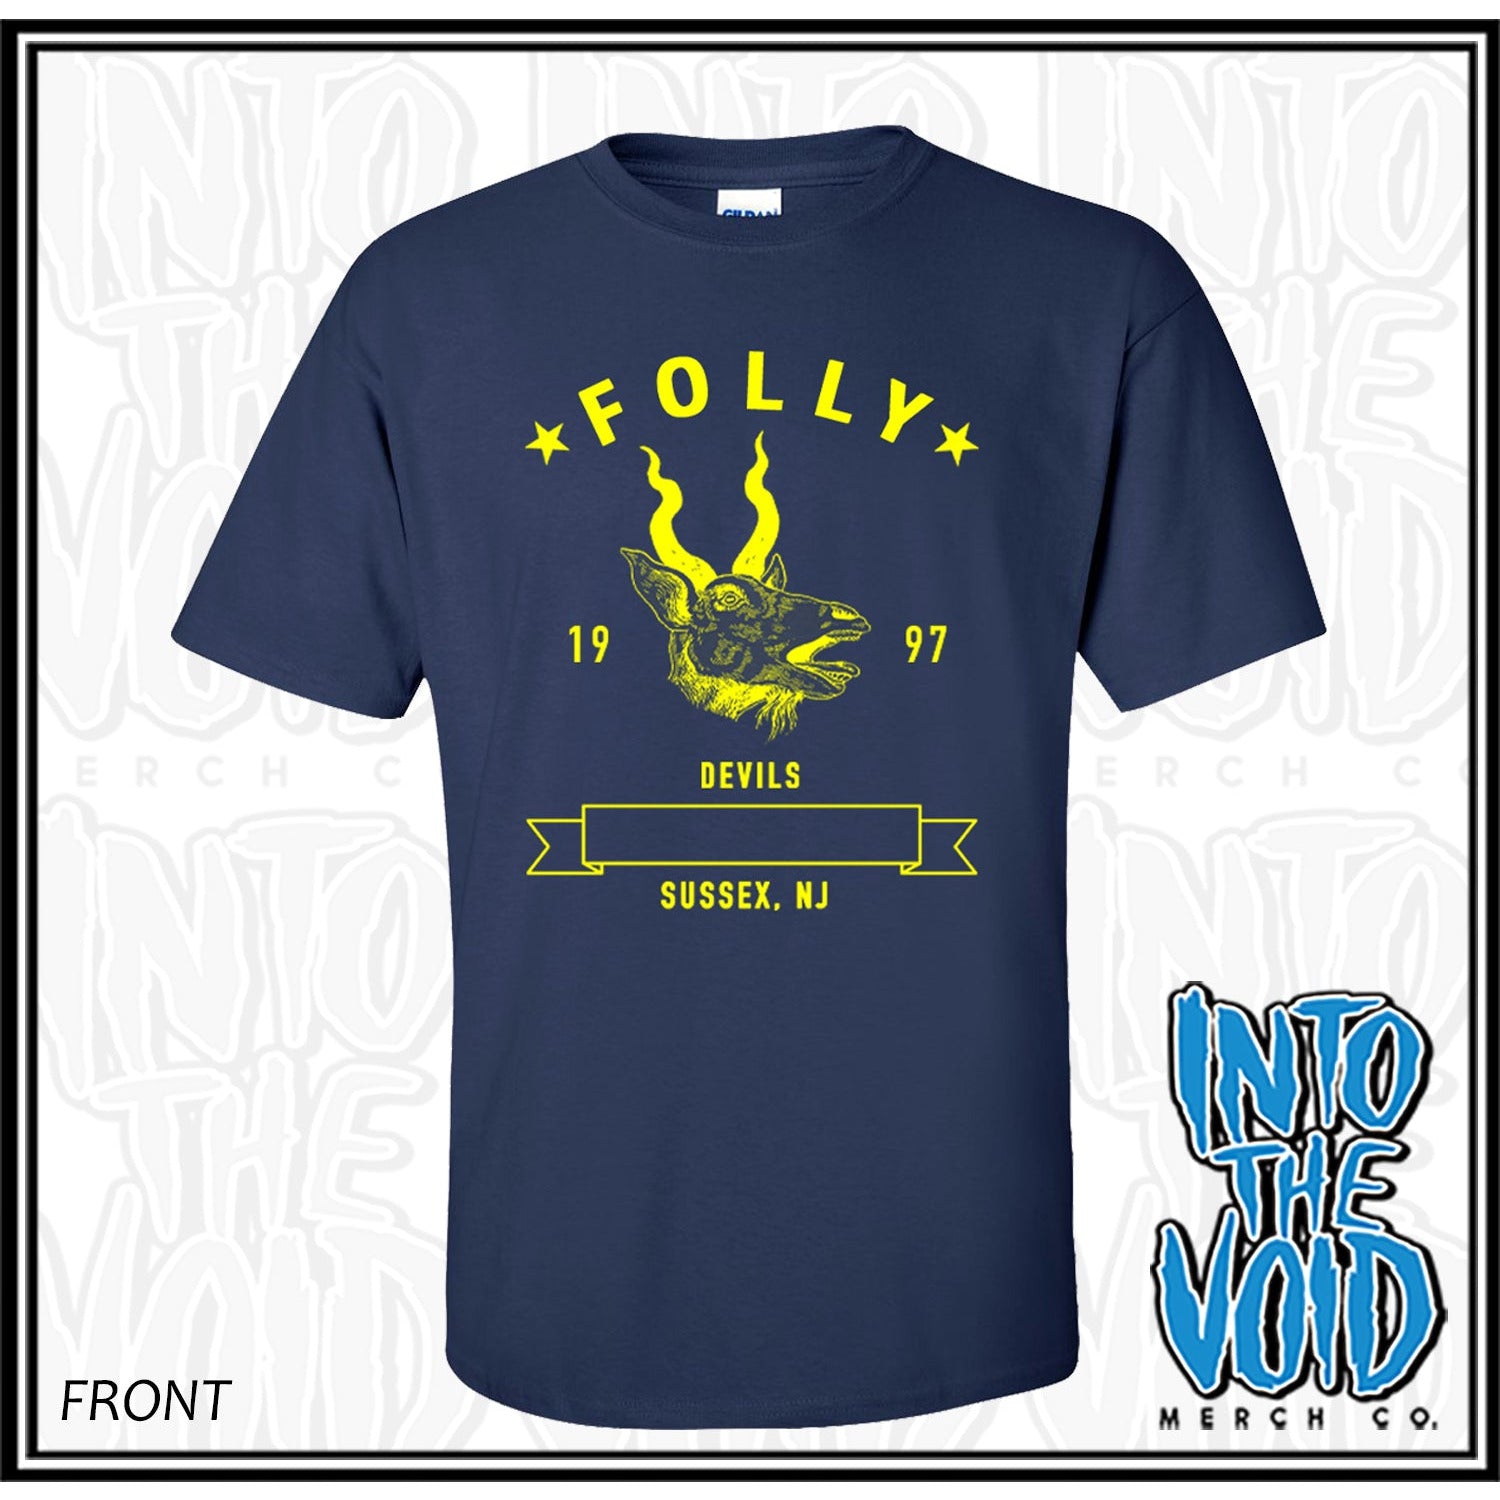 FOLLY - JERSEY DEVIL - Short Sleeve T-Shirt - INTO THE VOID Merch Co.